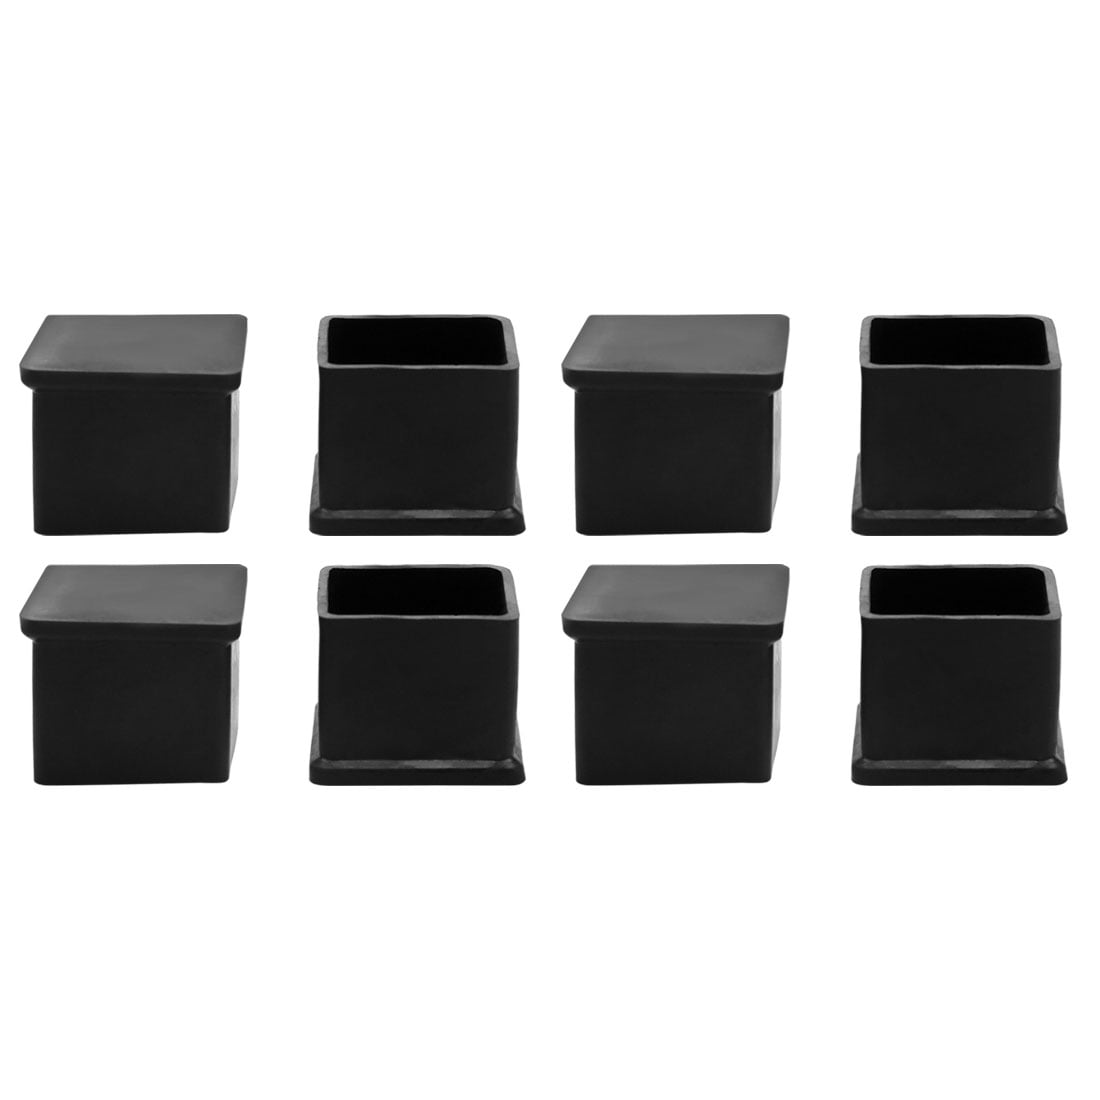 28 Pcs 15 x 30mm Rectangle Rubber Furniture Chair Table Feet Leg Cover Protector 